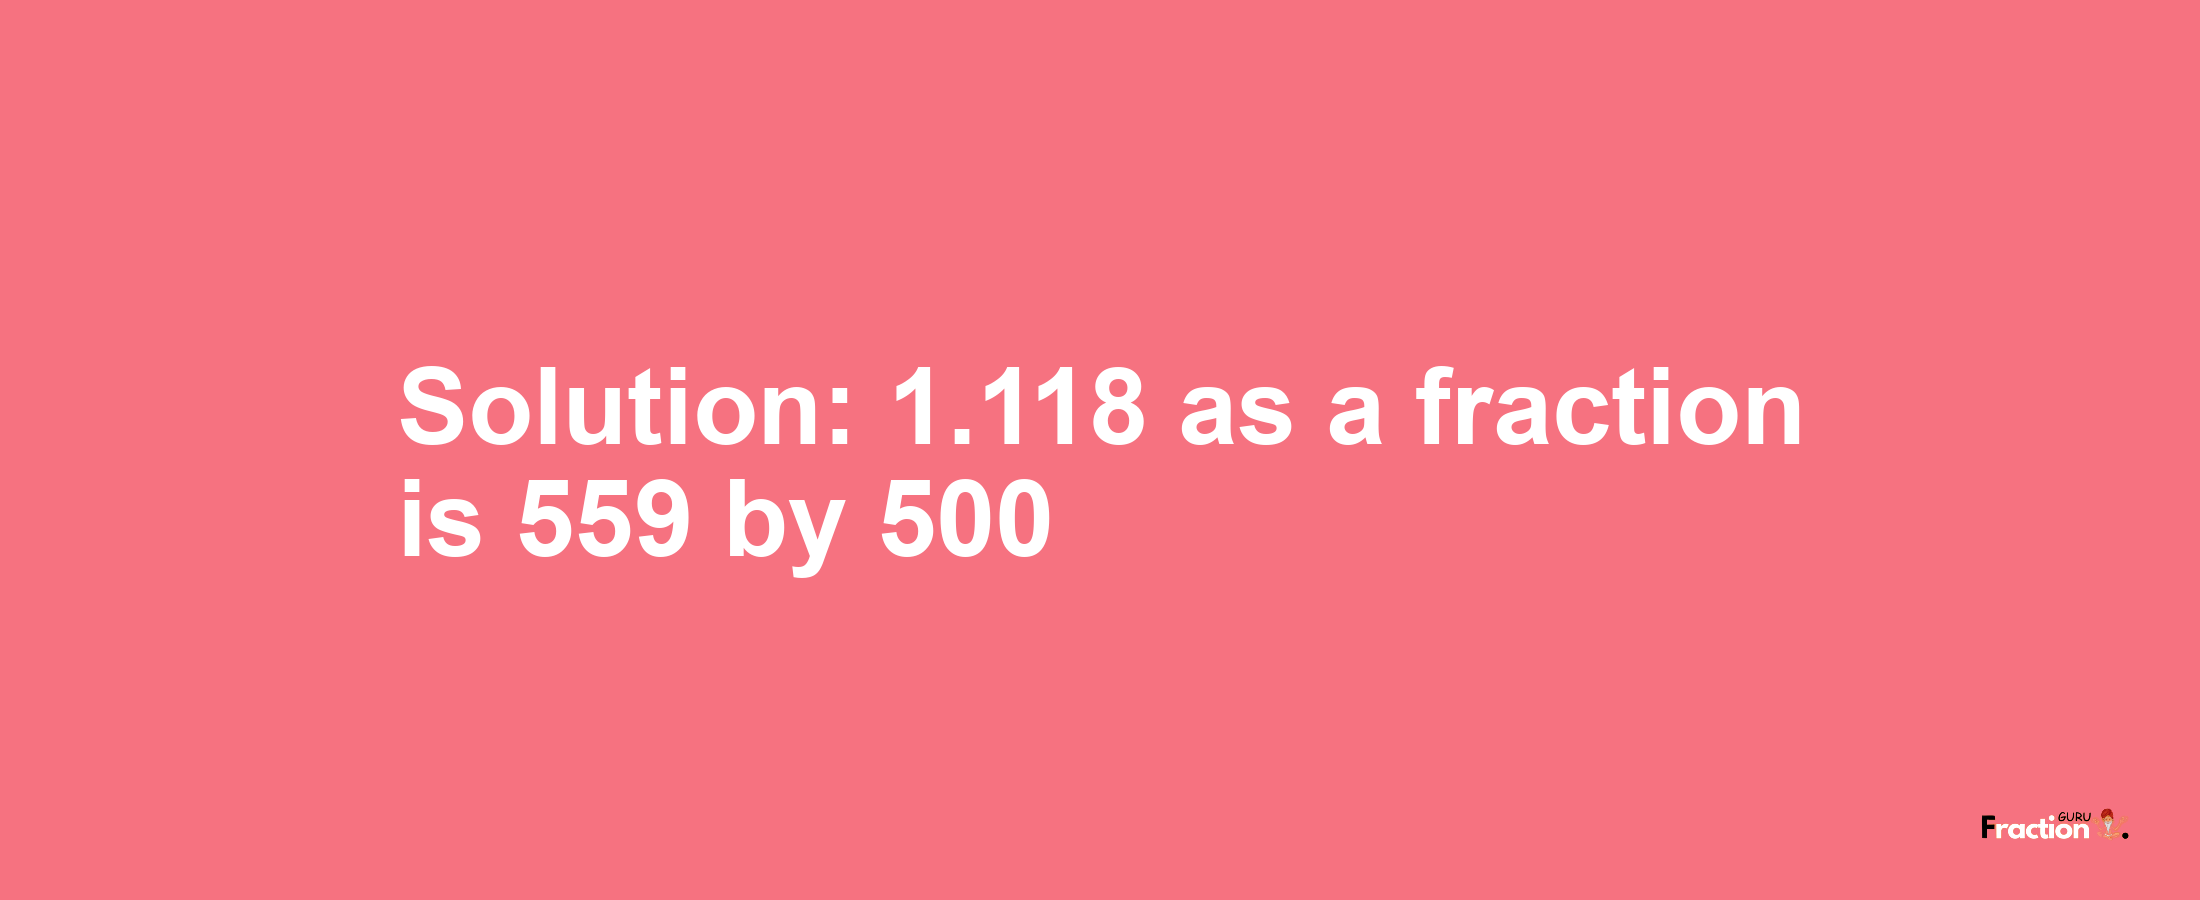 Solution:1.118 as a fraction is 559/500